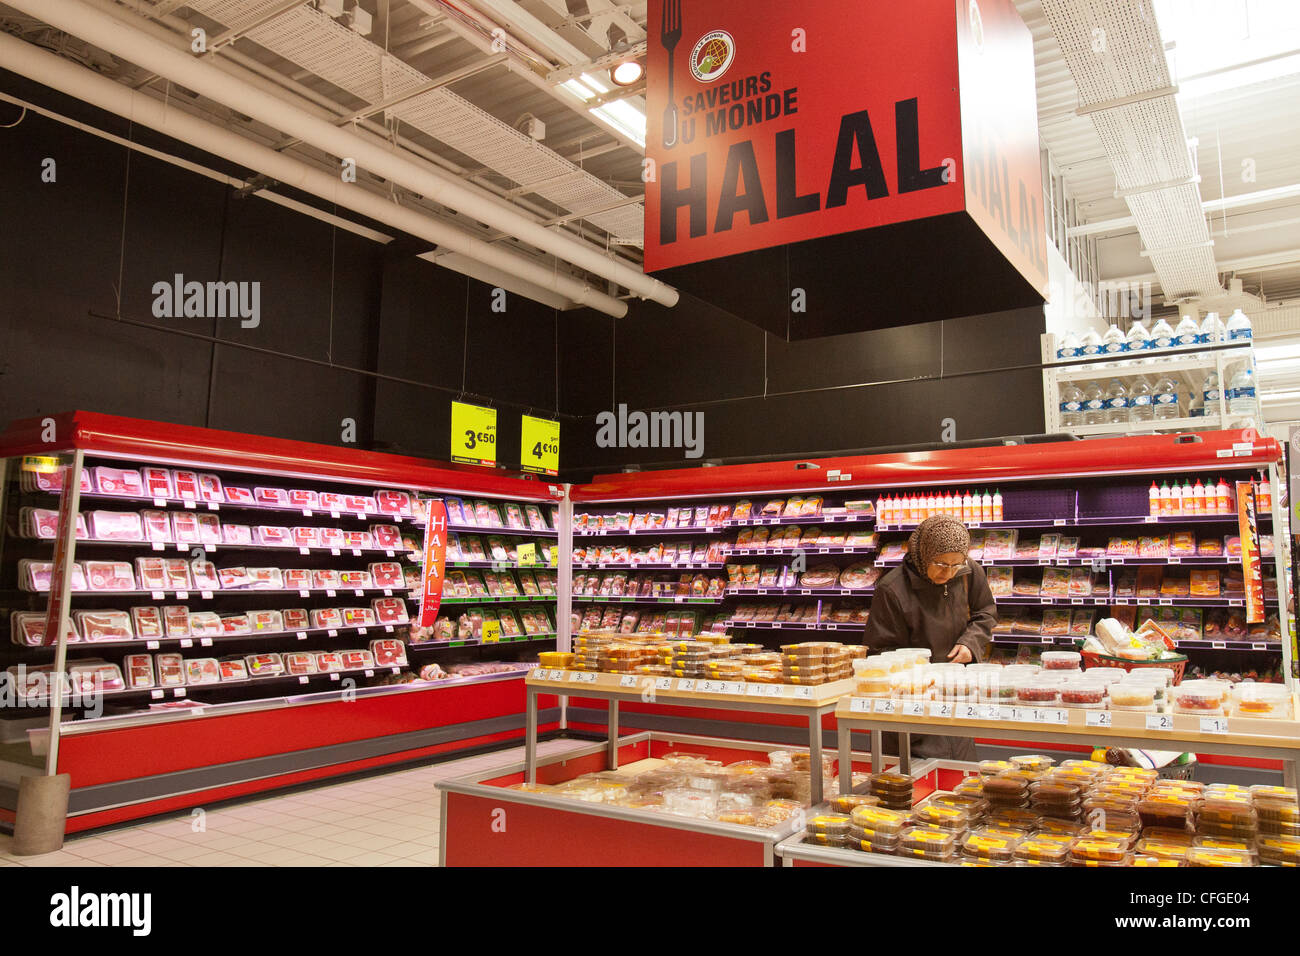 A muslim woman looks at Halal products in a supermarket in Nantes, France, 9 March 2012. Stock Photo